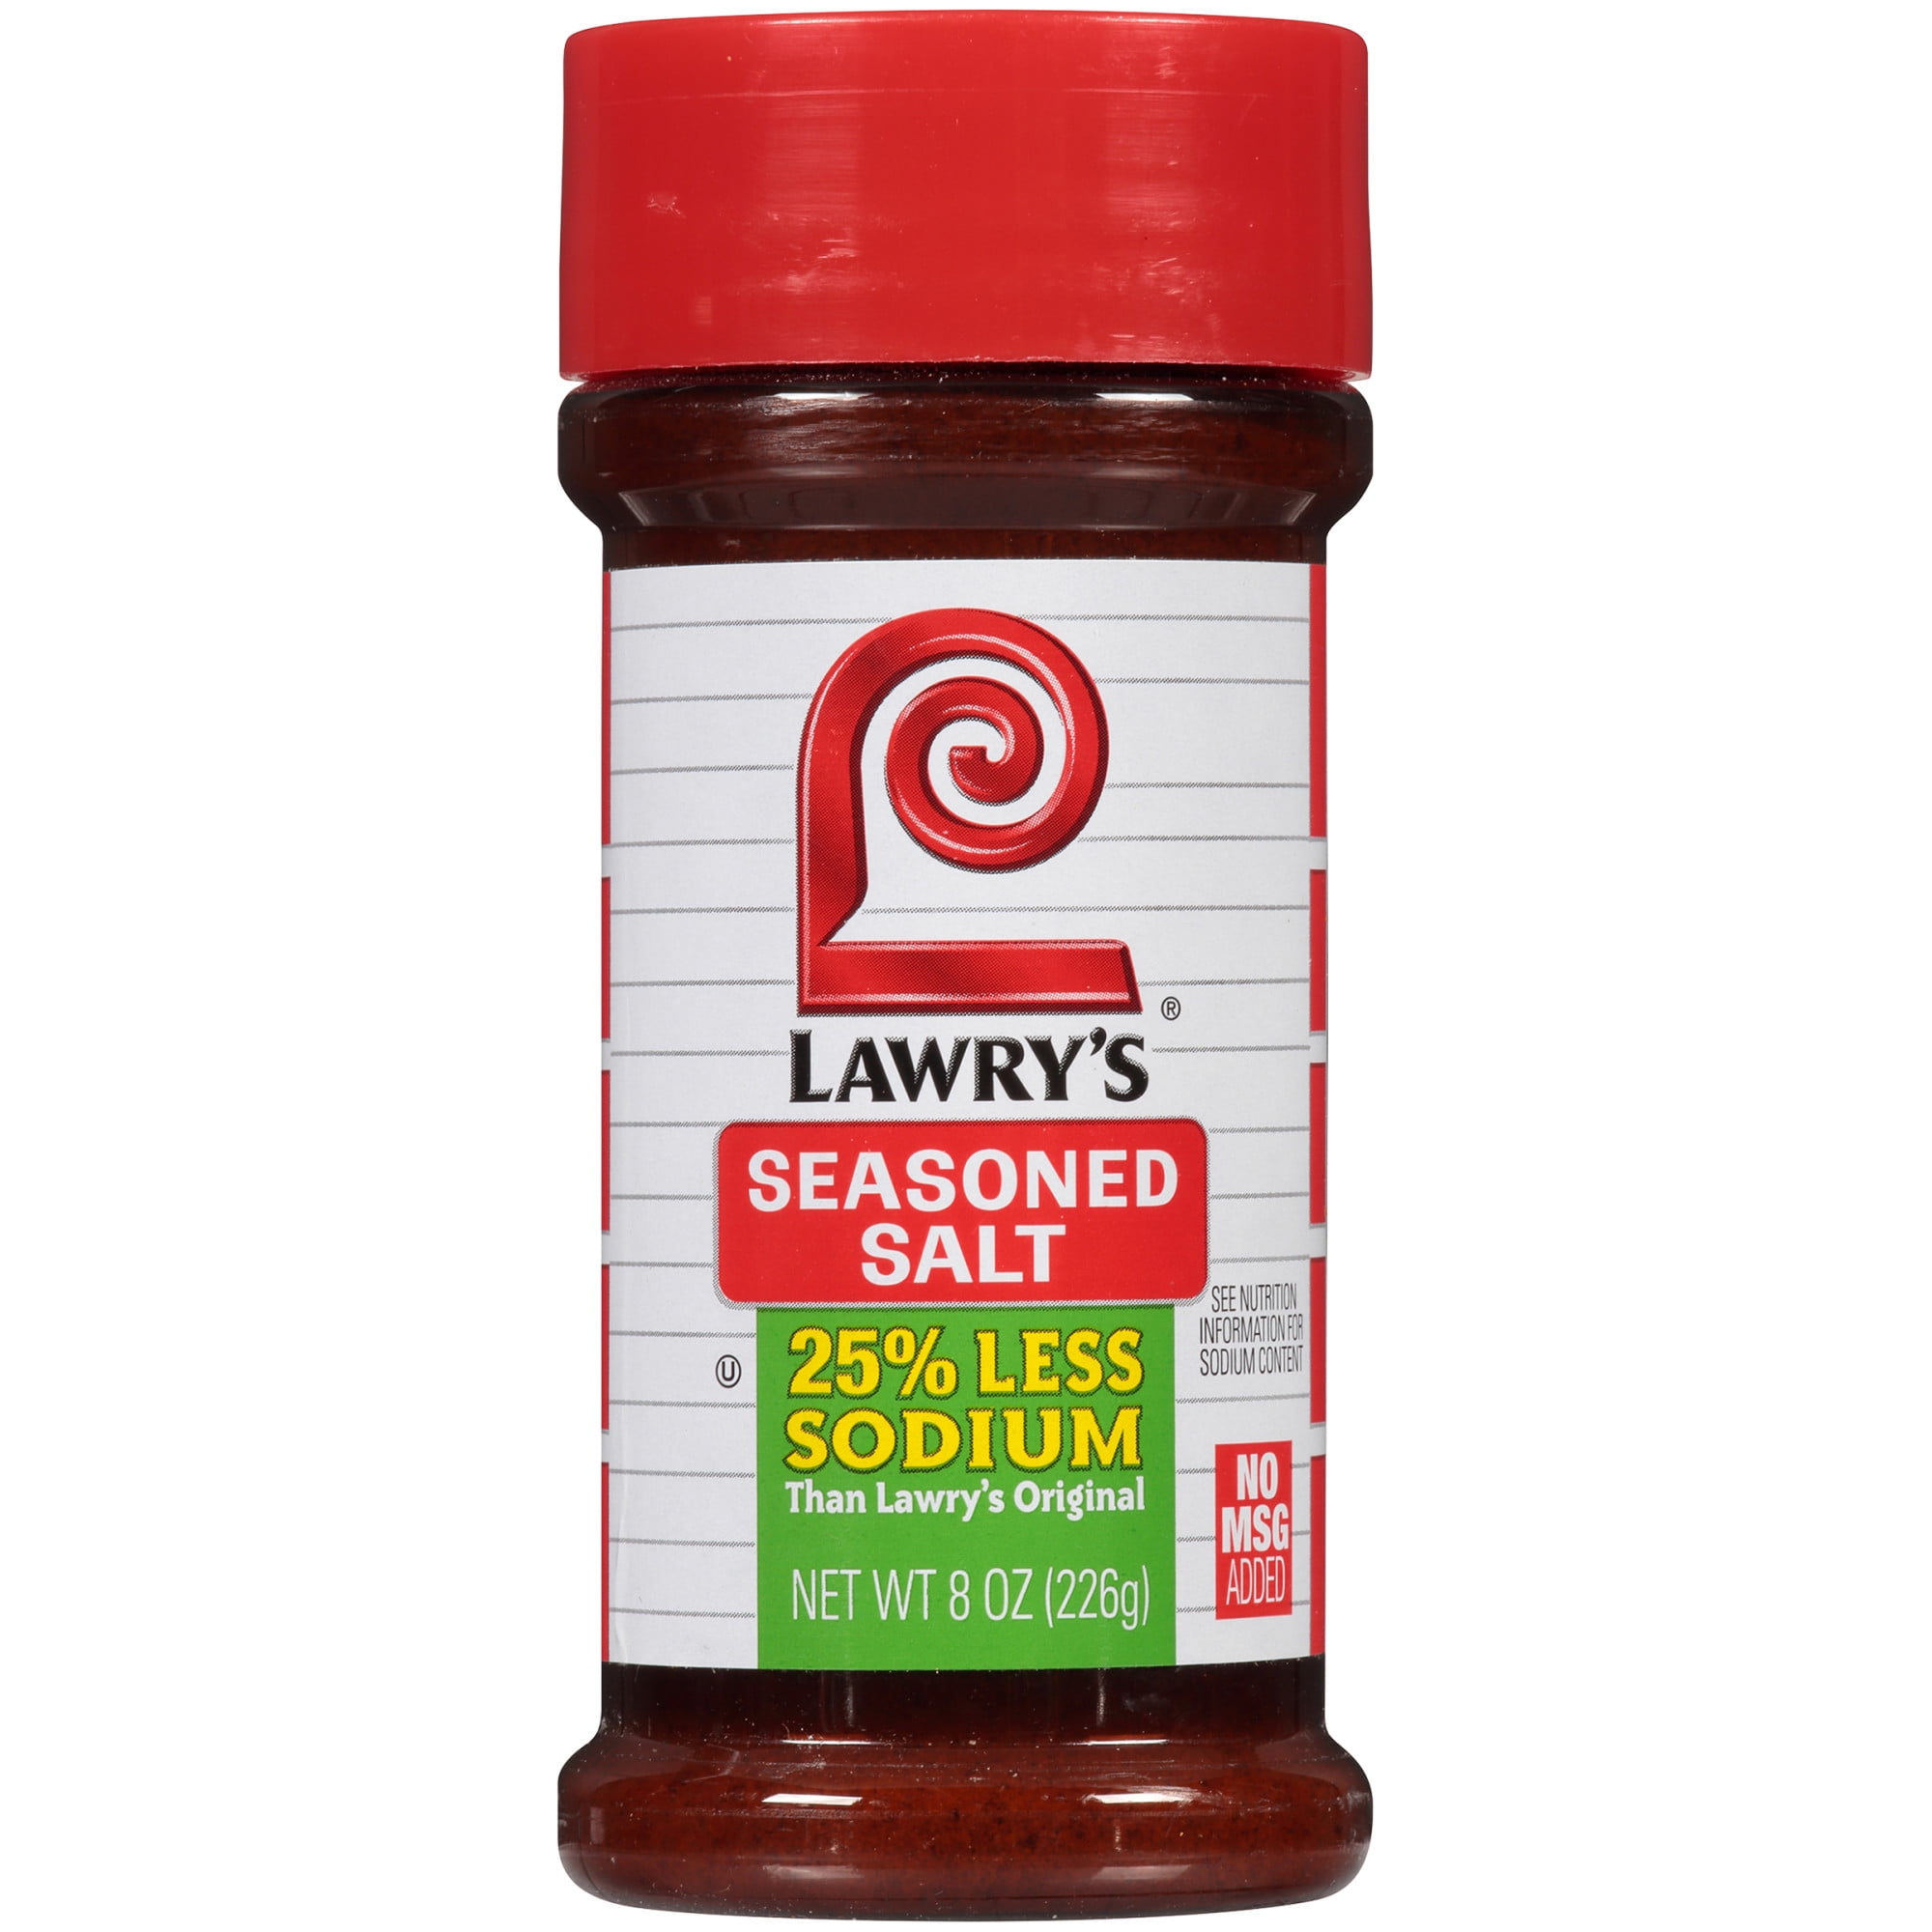  Lawry's Salt Free 17 Seasoning Packets, 500 count - One 500  Count Box of 17 Seasoning Spice Blend Packets, Perfect Seasoning for Low  Sodium and Reduced Sodium Diets : Flavored Salt : Grocery & Gourmet Food